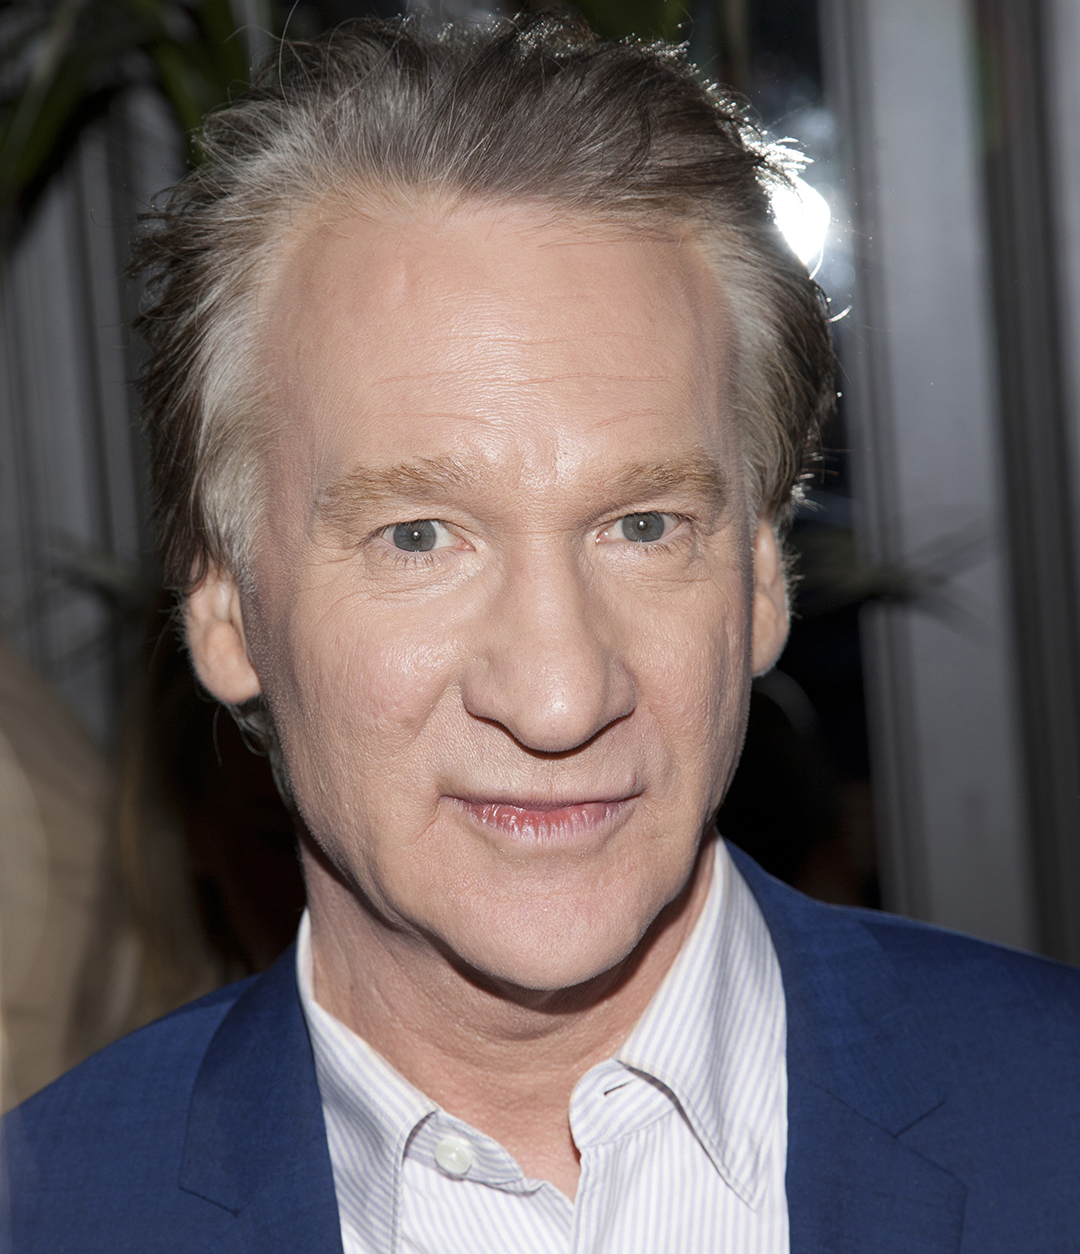 Bill Maher, Jane Fonda, And More Announced As Late Show Guests - The Late Show with Stephen ...